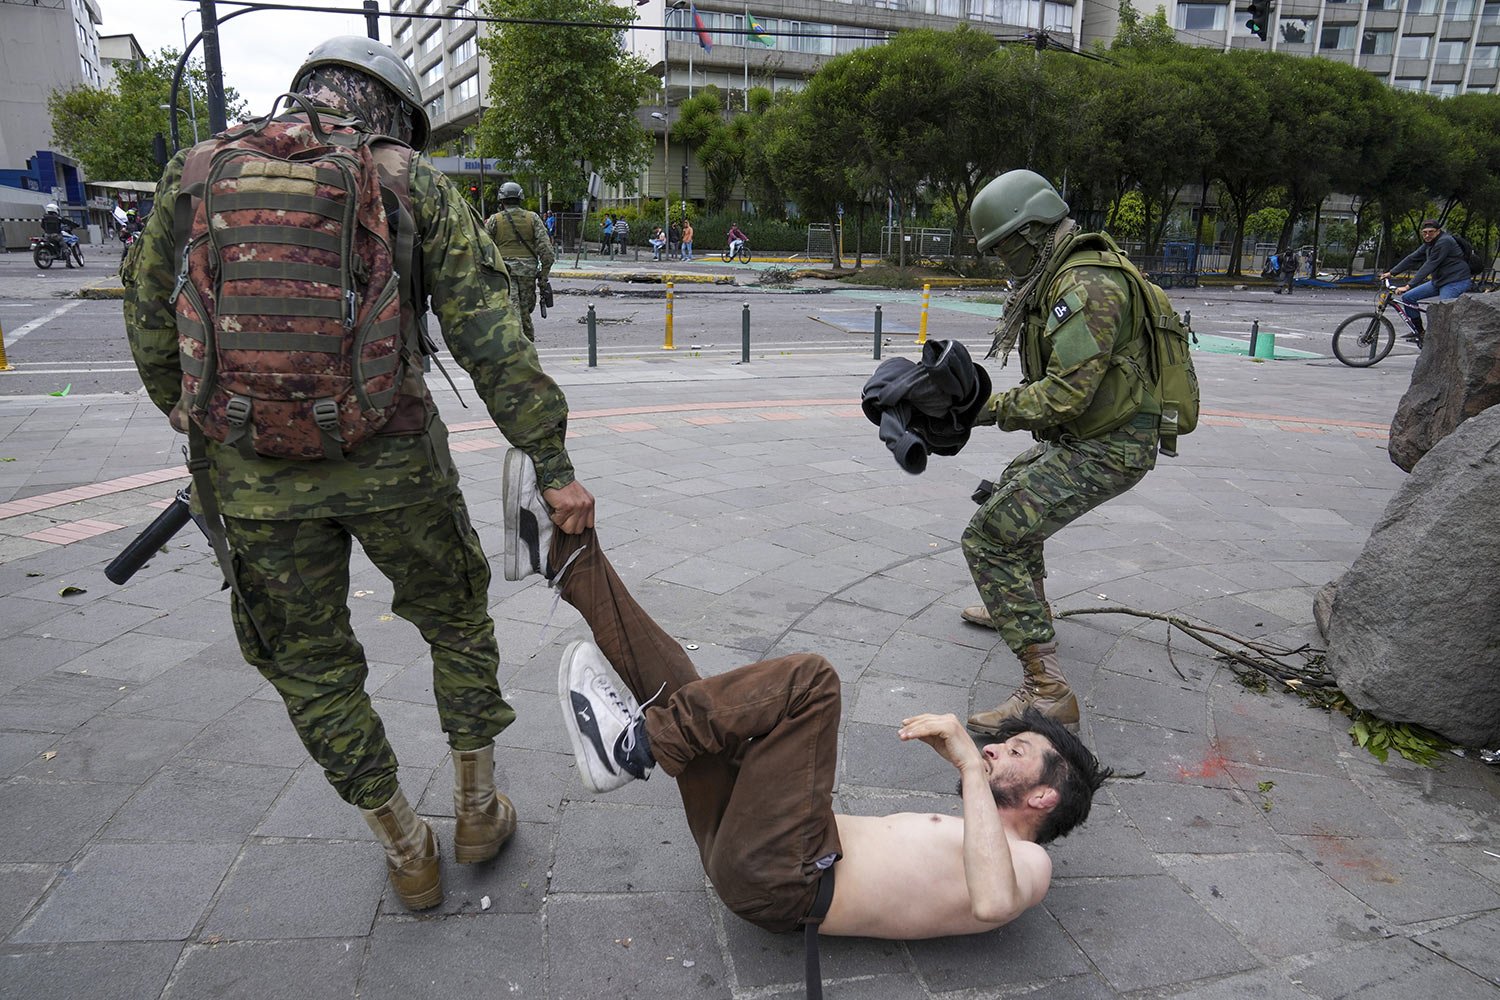  Soldiers detain a demonstrator during protests against the government of President Guillermo Lasso and rising fuel prices in Quito, Ecuador, Tuesday, June 21, 2022.  (AP Photo/Dolores Ochoa) 